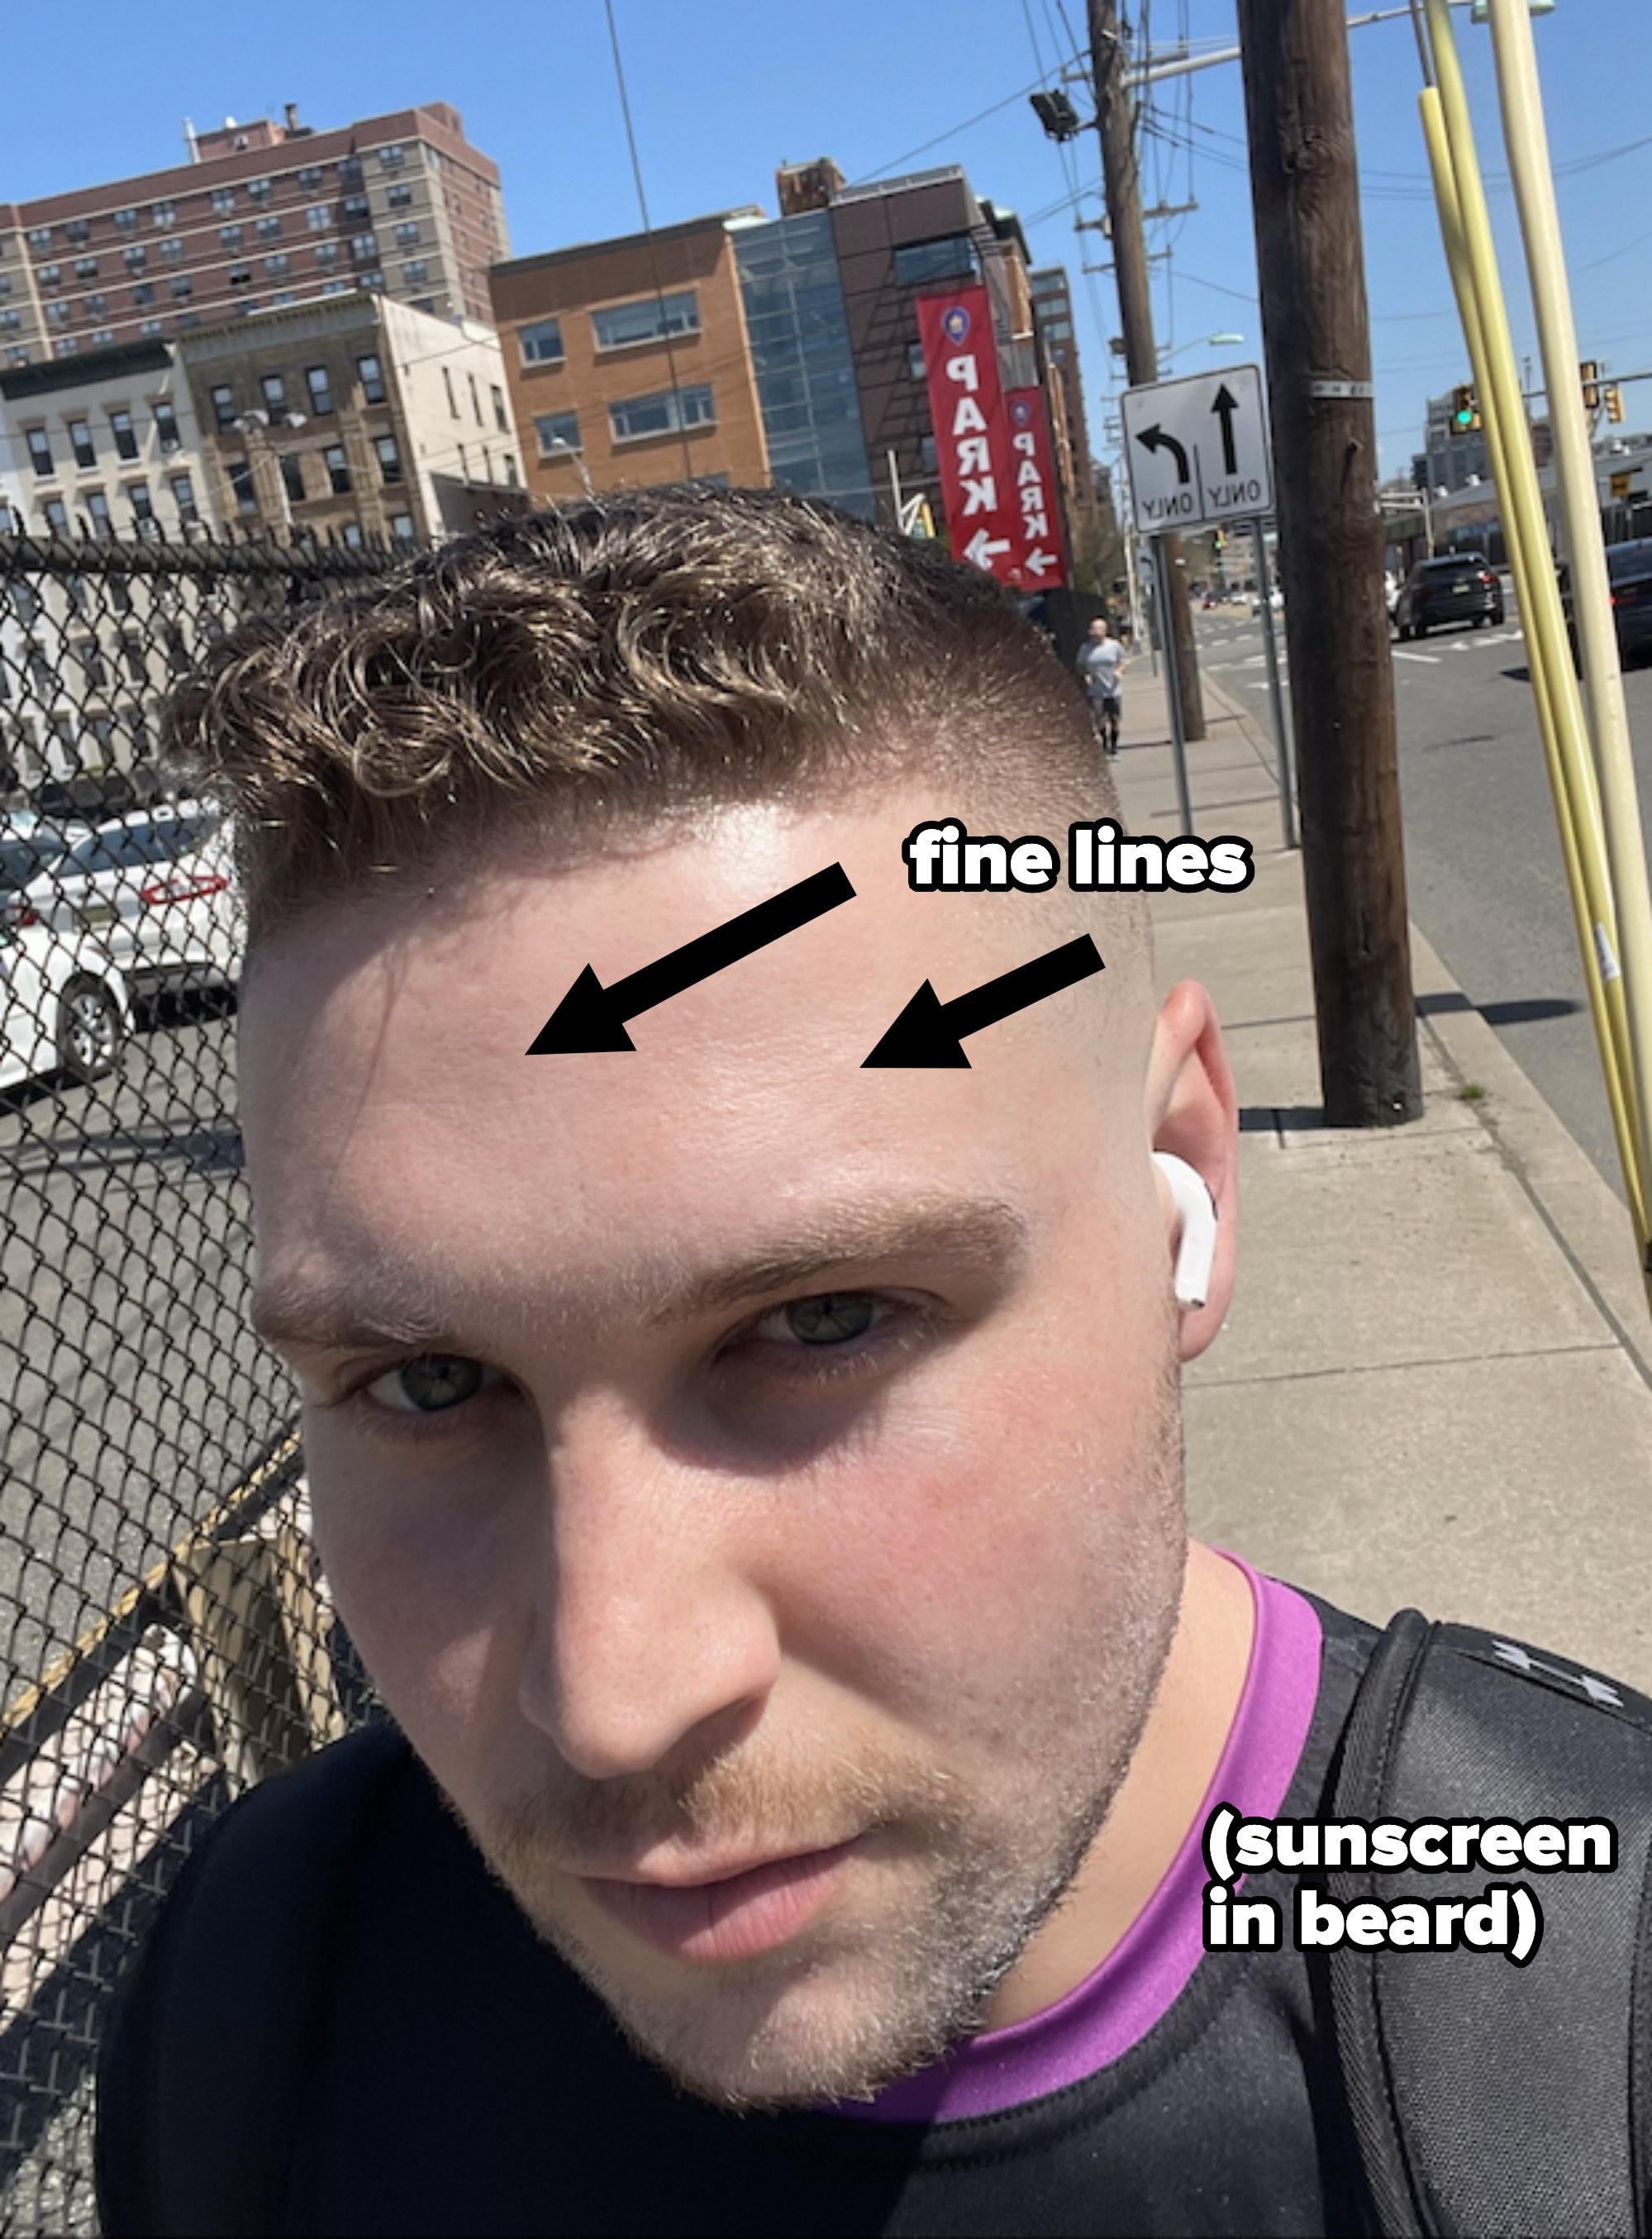 Close-up of the writer&#x27;s face with arrow pointing to fine lines on forehead and indicating sunscreen on beard